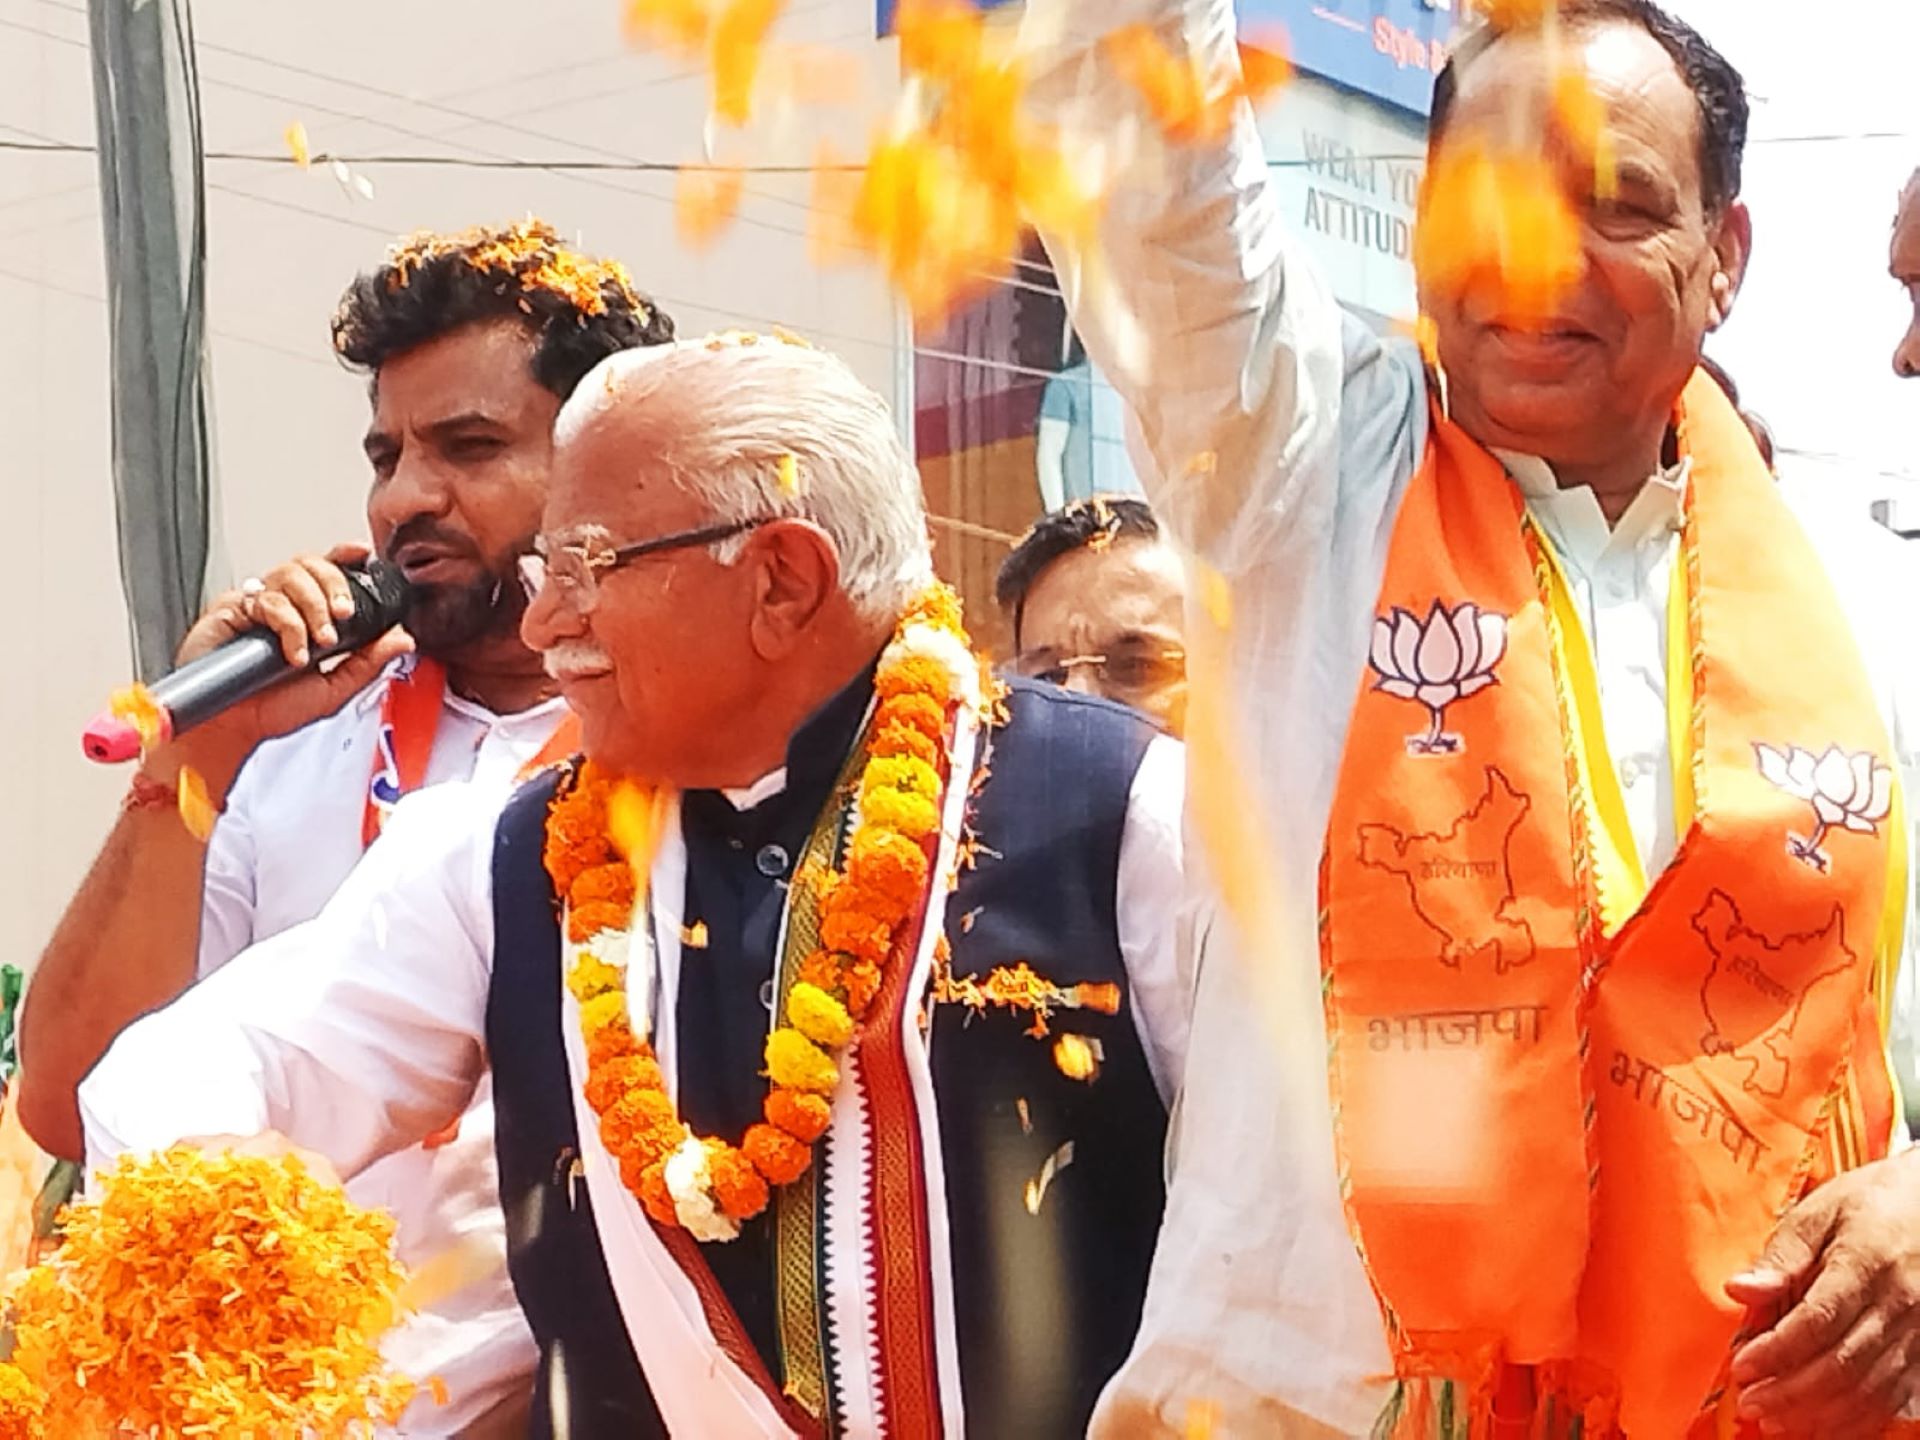 Power Play in Haryana: Manohar Lal Khattar Claims BJP's Support from JJP MLAs